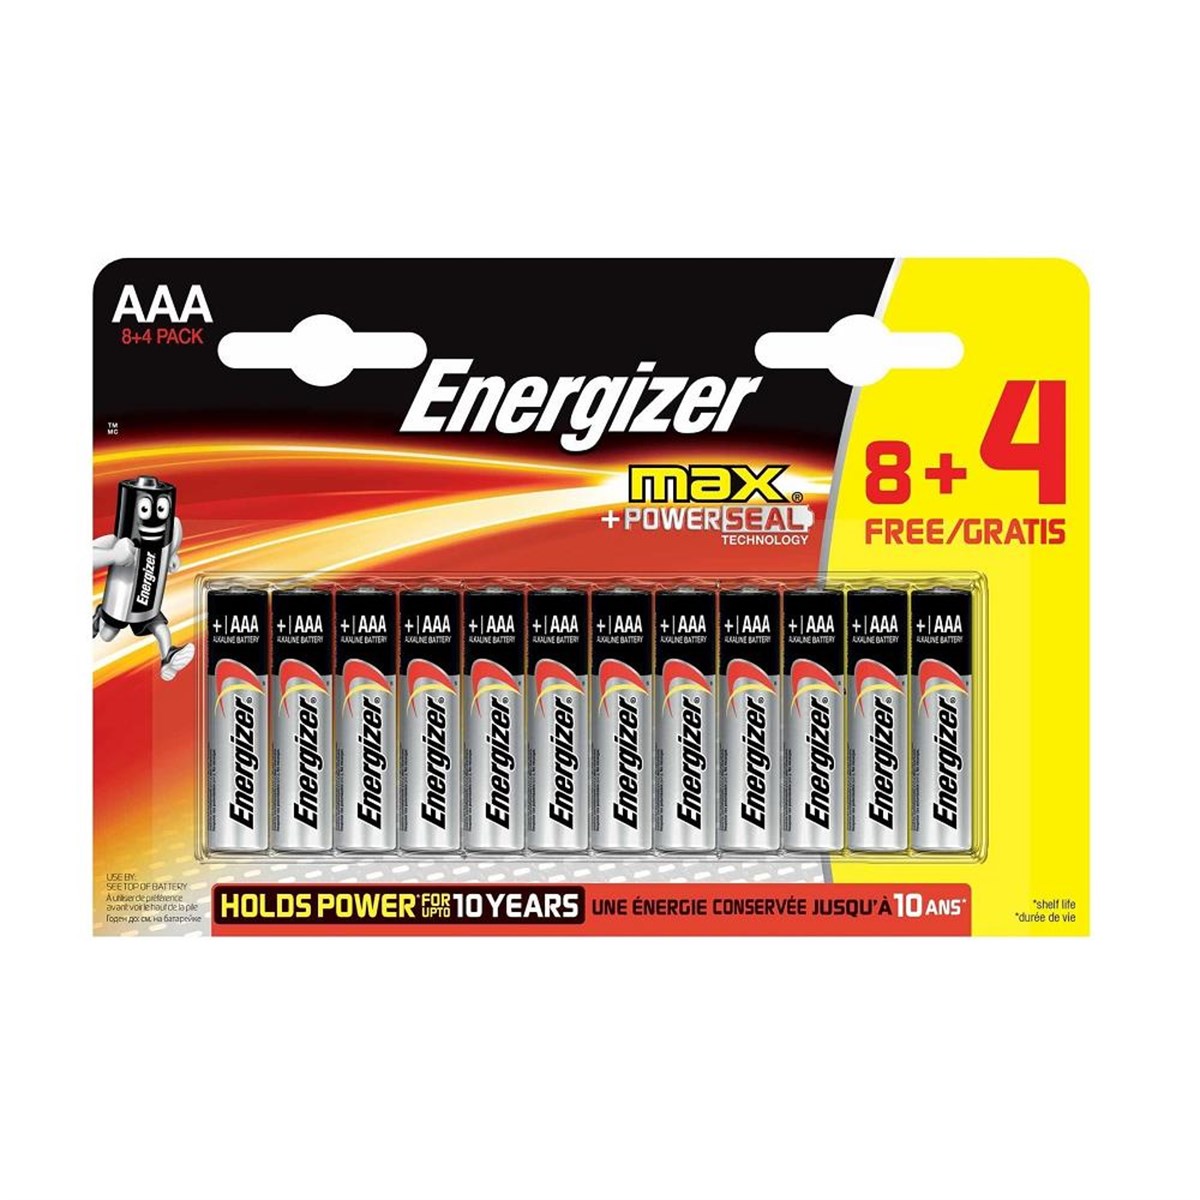 Energizer Alkaline Max Power Seal AAA İnce Pil 8+4'lü Paket